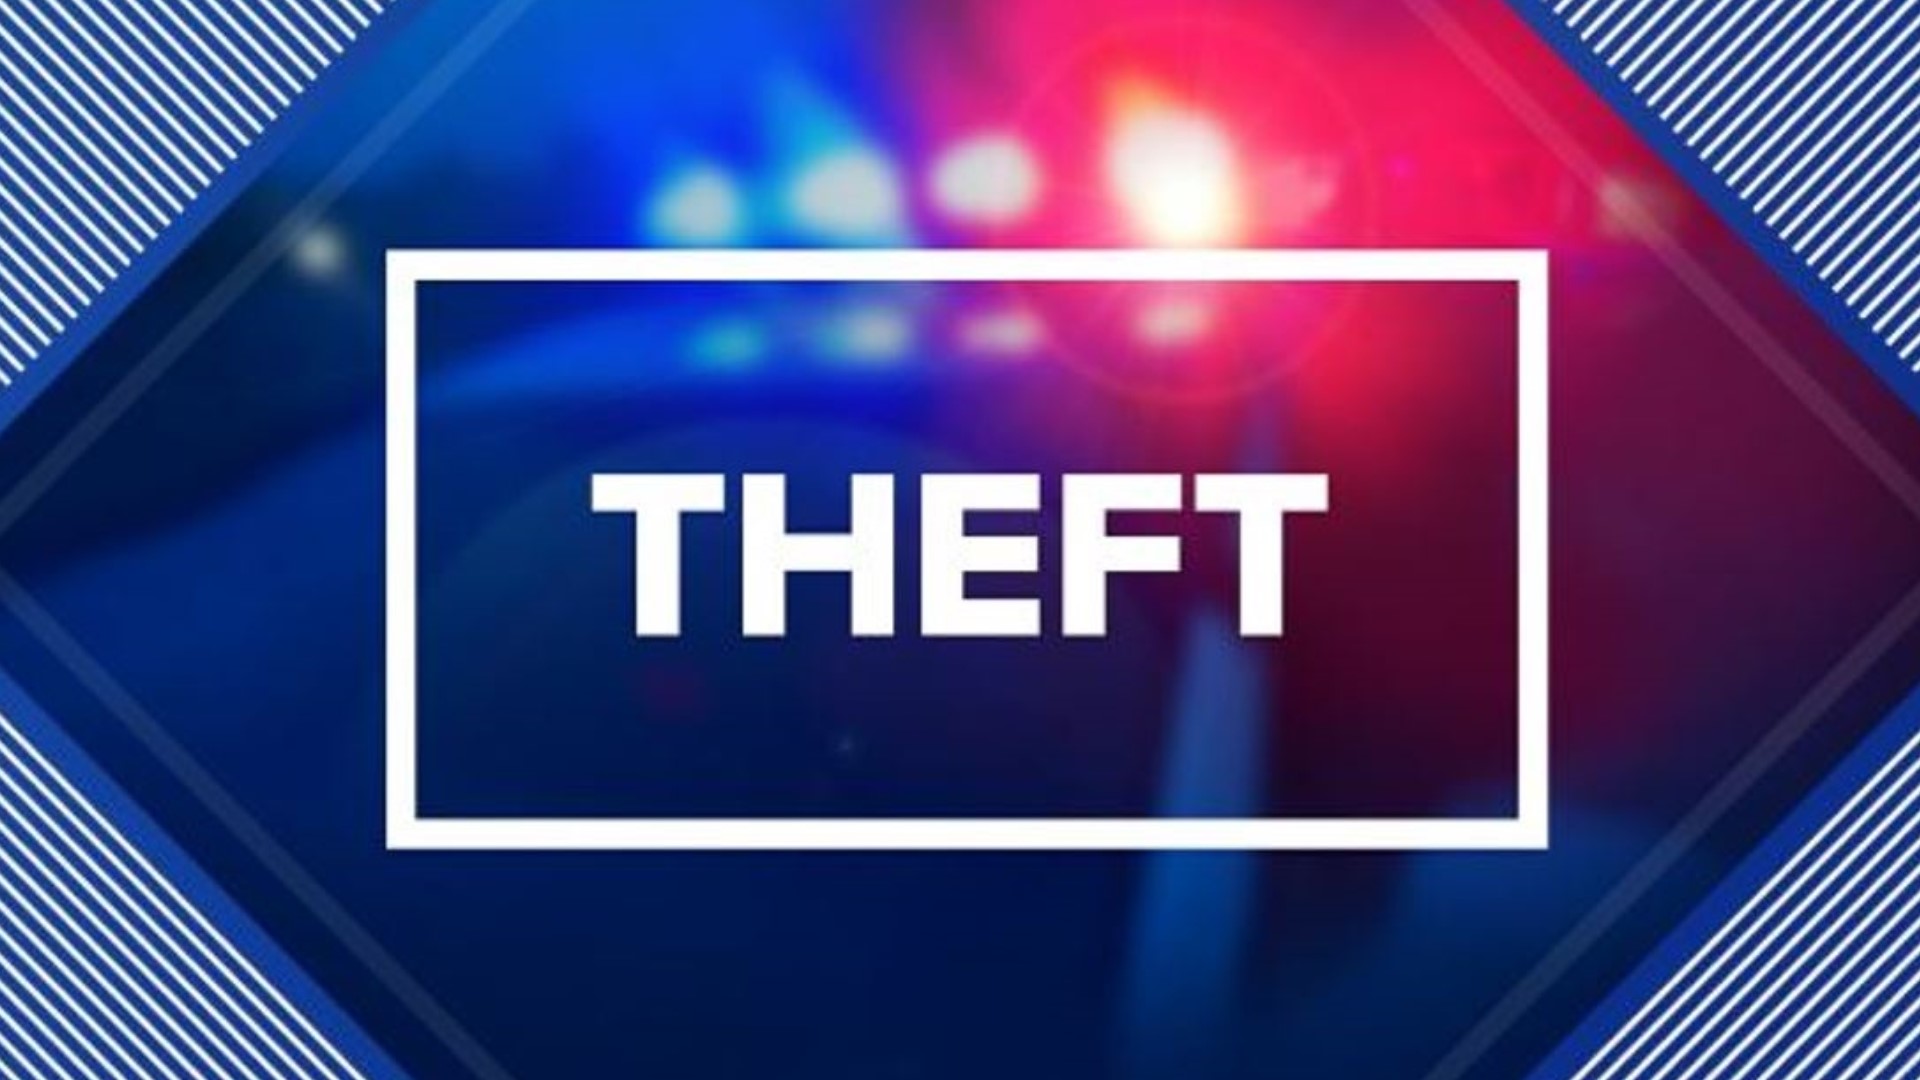 Police say the theft happened over the course of a few weeks in October.